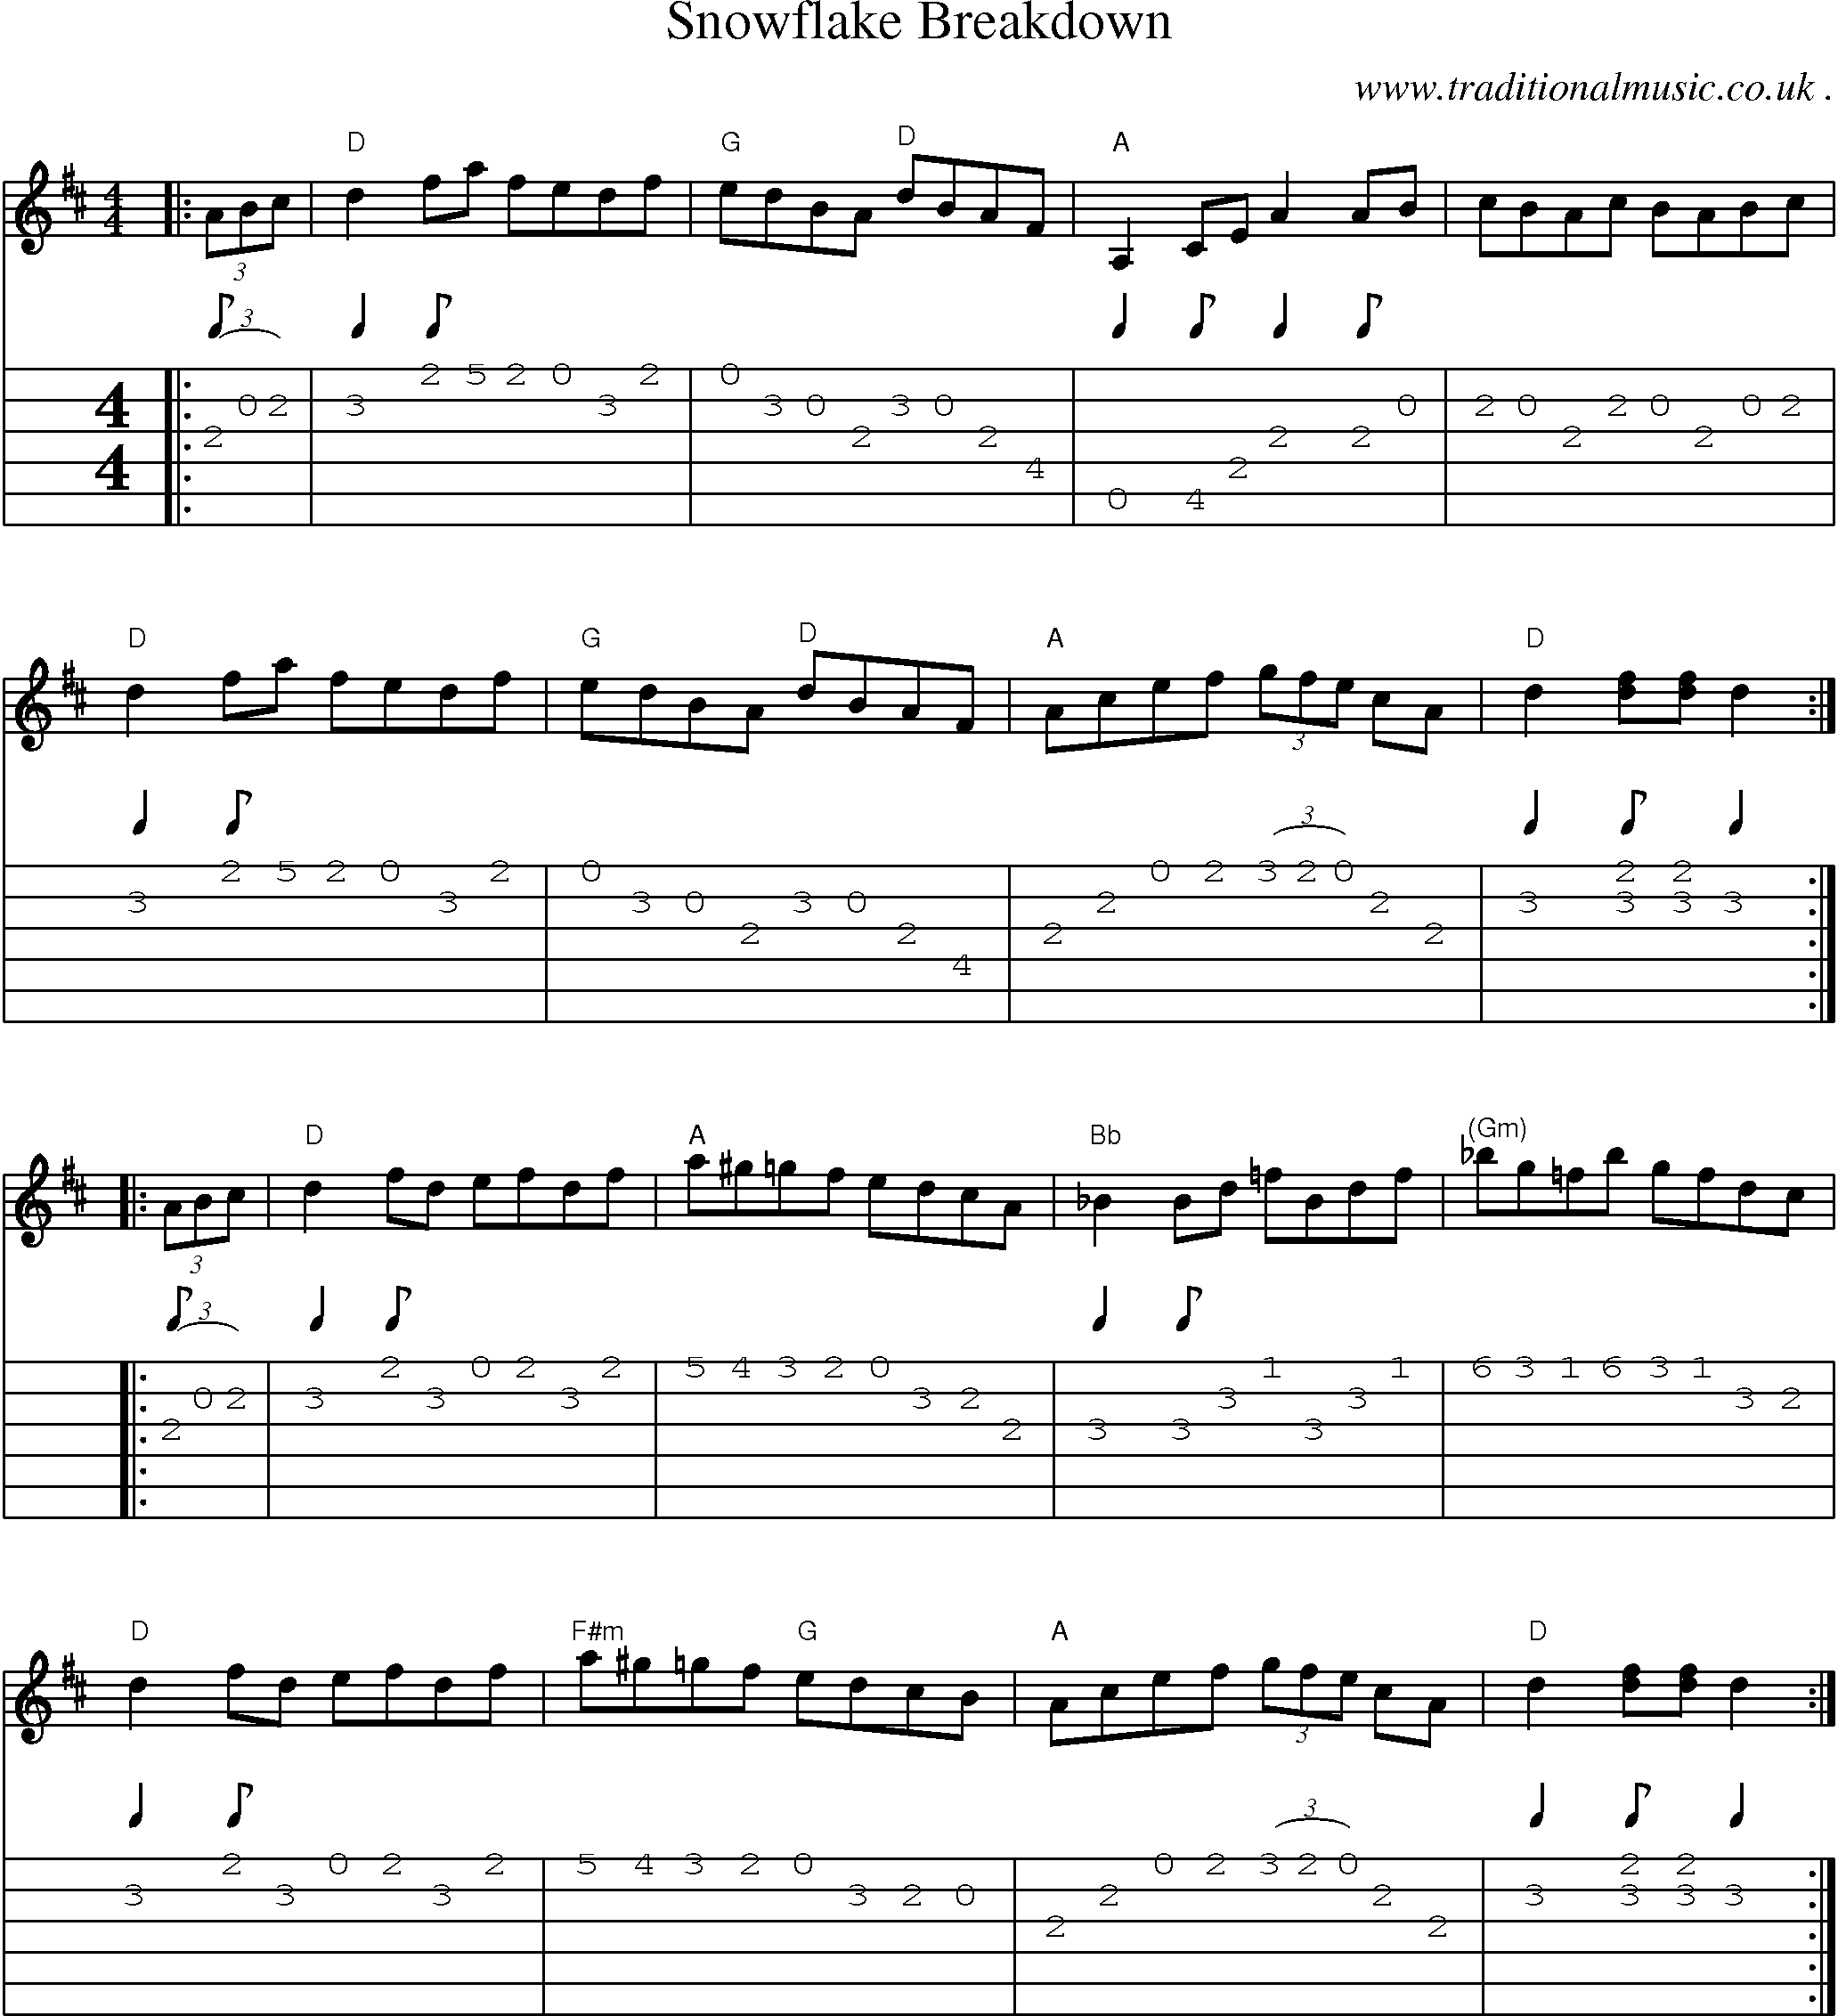 Music Score and Guitar Tabs for Snowflake Breakdown